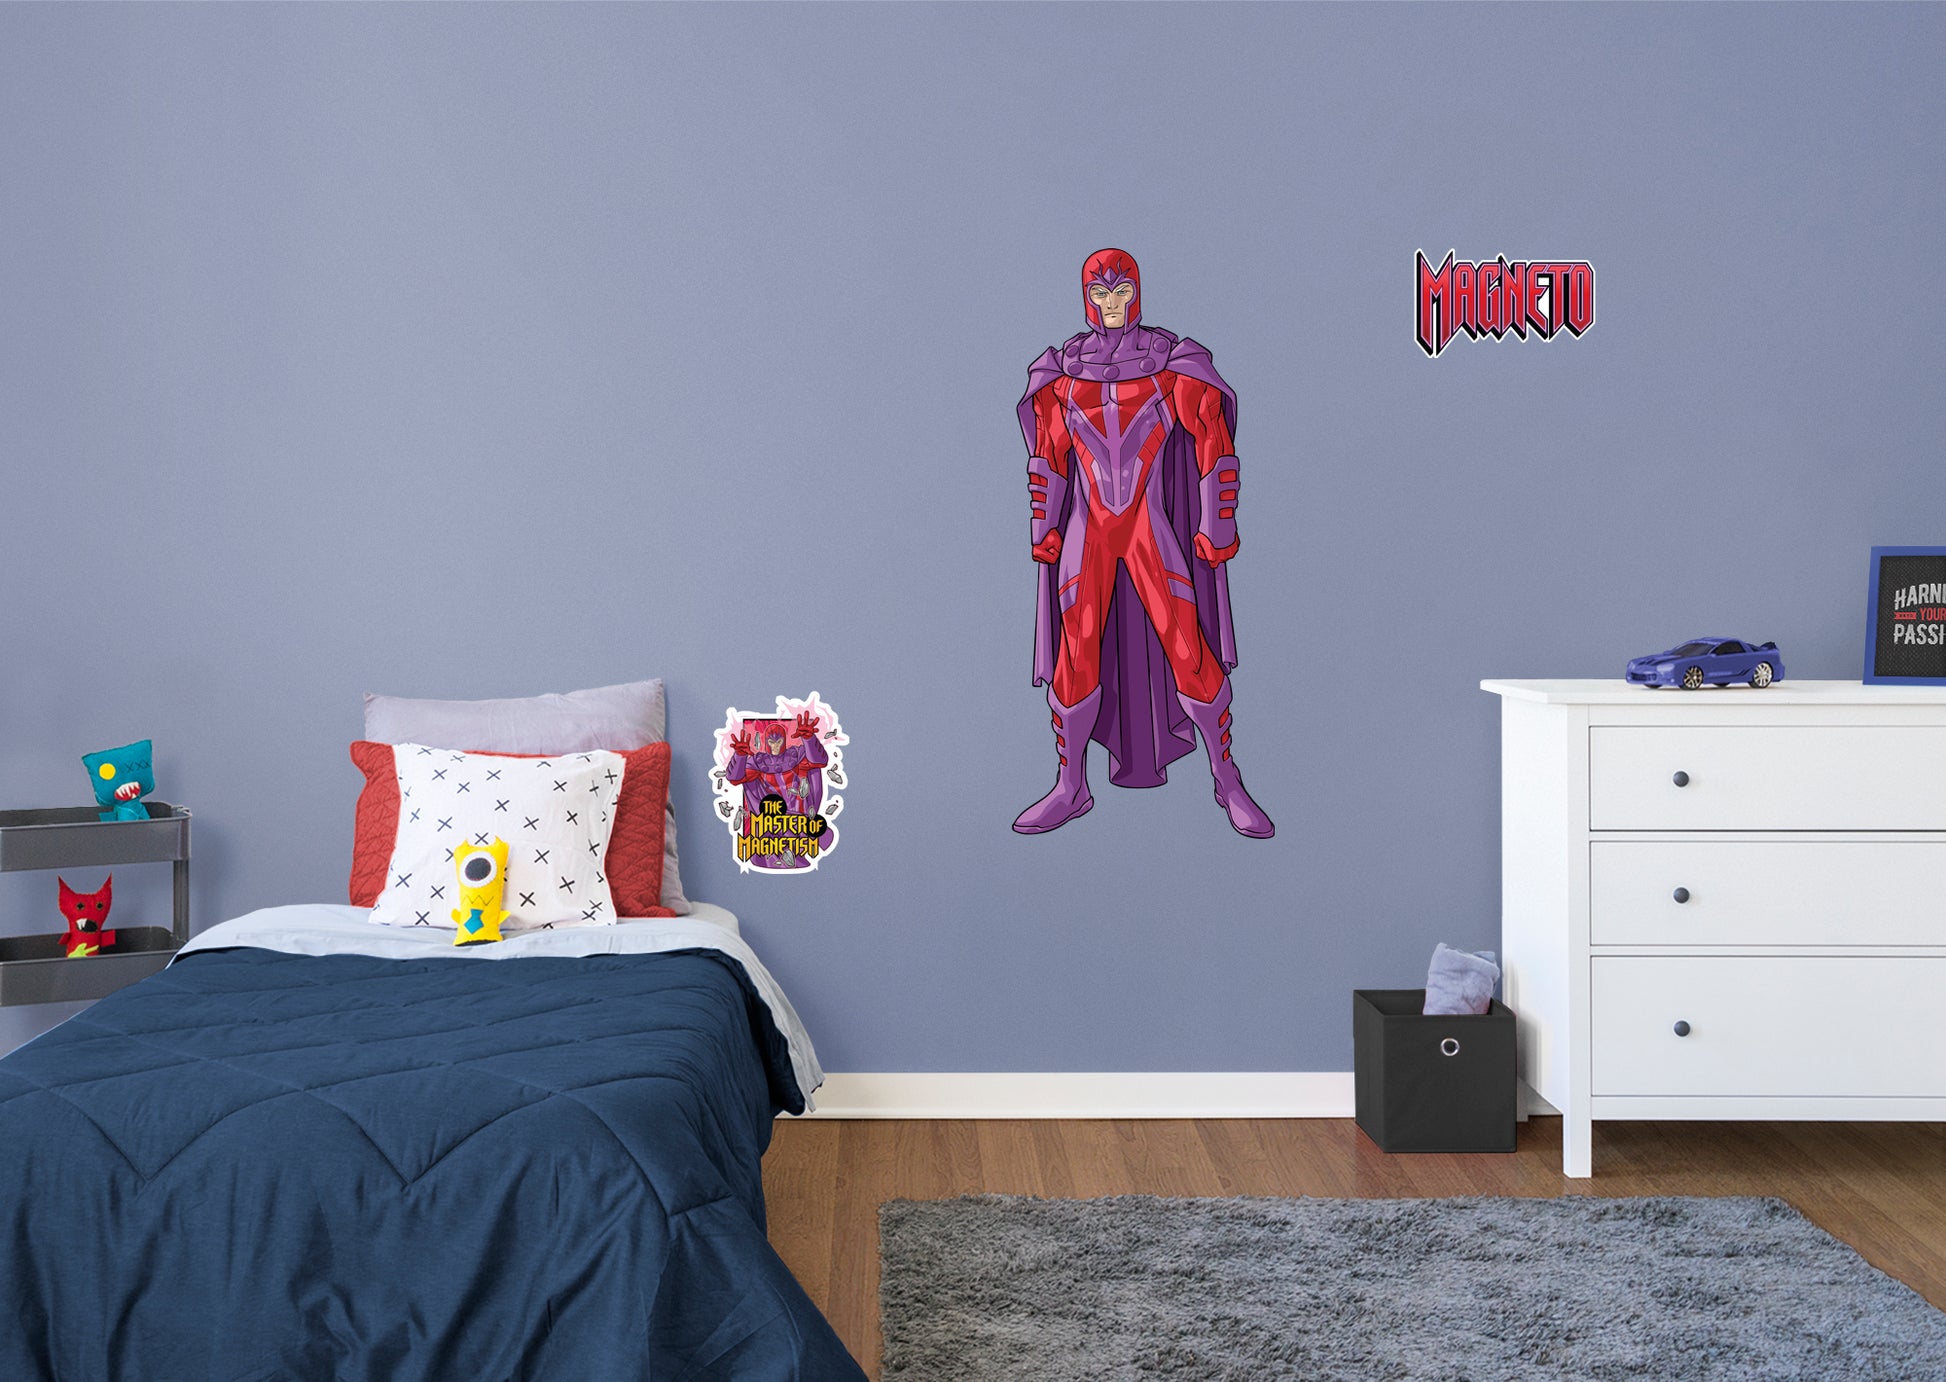 Giant Character + 2 Decals (21"W x 51"H)